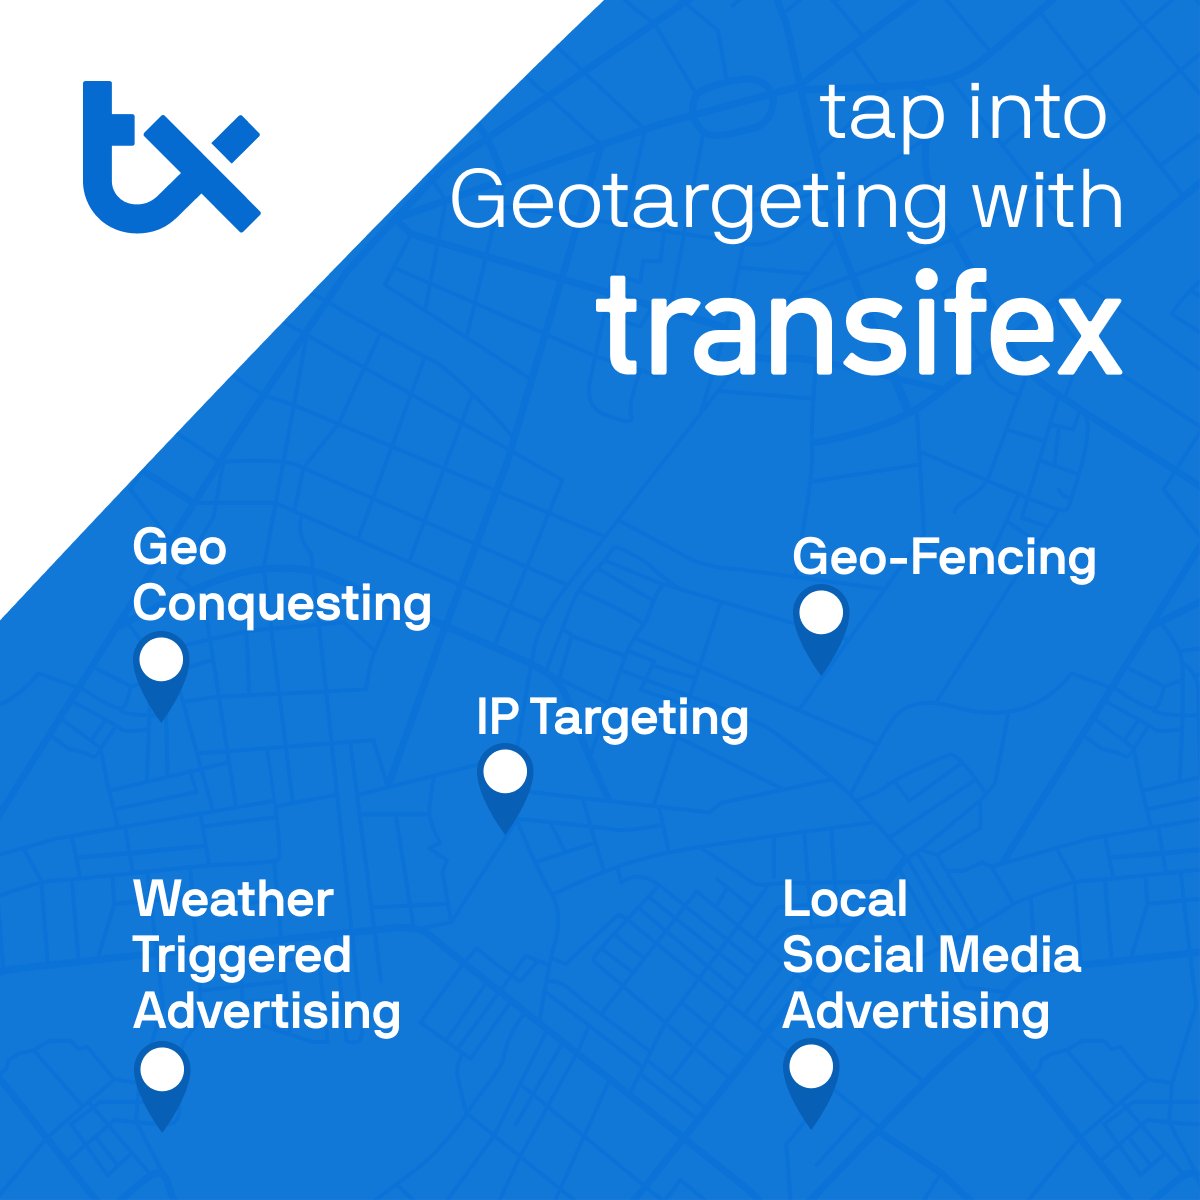 Geo-targeting ensures your content reaches the right people at the right time. Learn how to localize your content so that your message hits home globally: hubs.ly/Q02vRBRz0 #transifex #AI #localization #geotargeting #geotargetingmarketing #geofencing #marketingtips